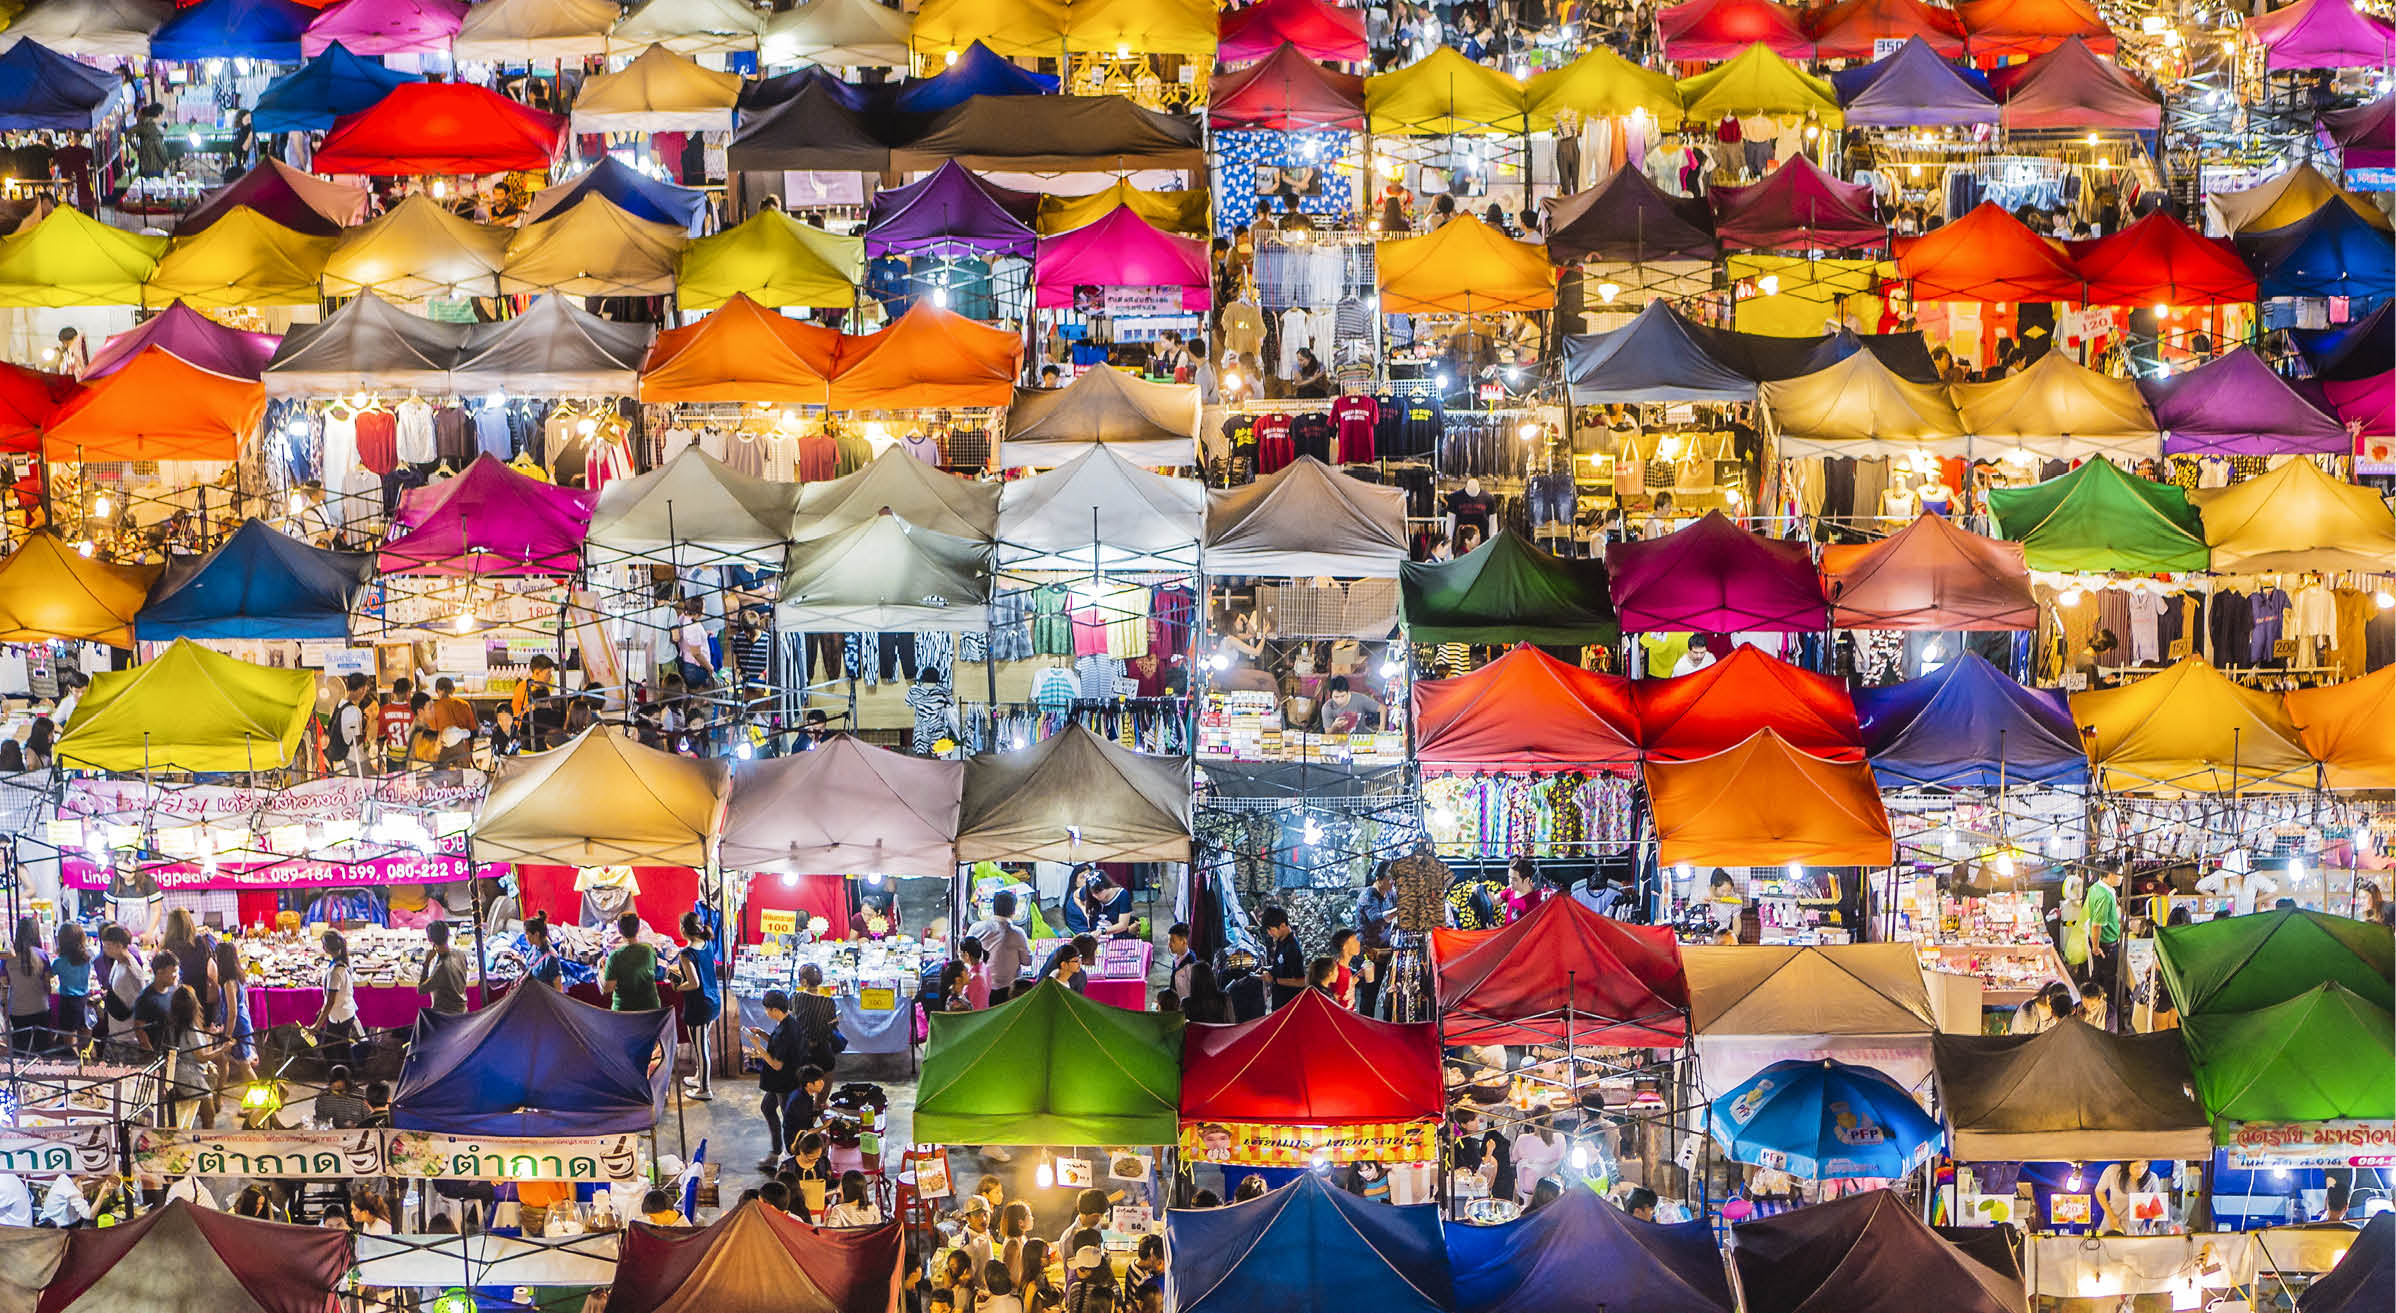 The Rod Fai market in Ratchada is open from thursday to sunday. It is a very popular spot for locals. The market is known because the vintage items shops and the food stalls but all kind of merchandise are sold here